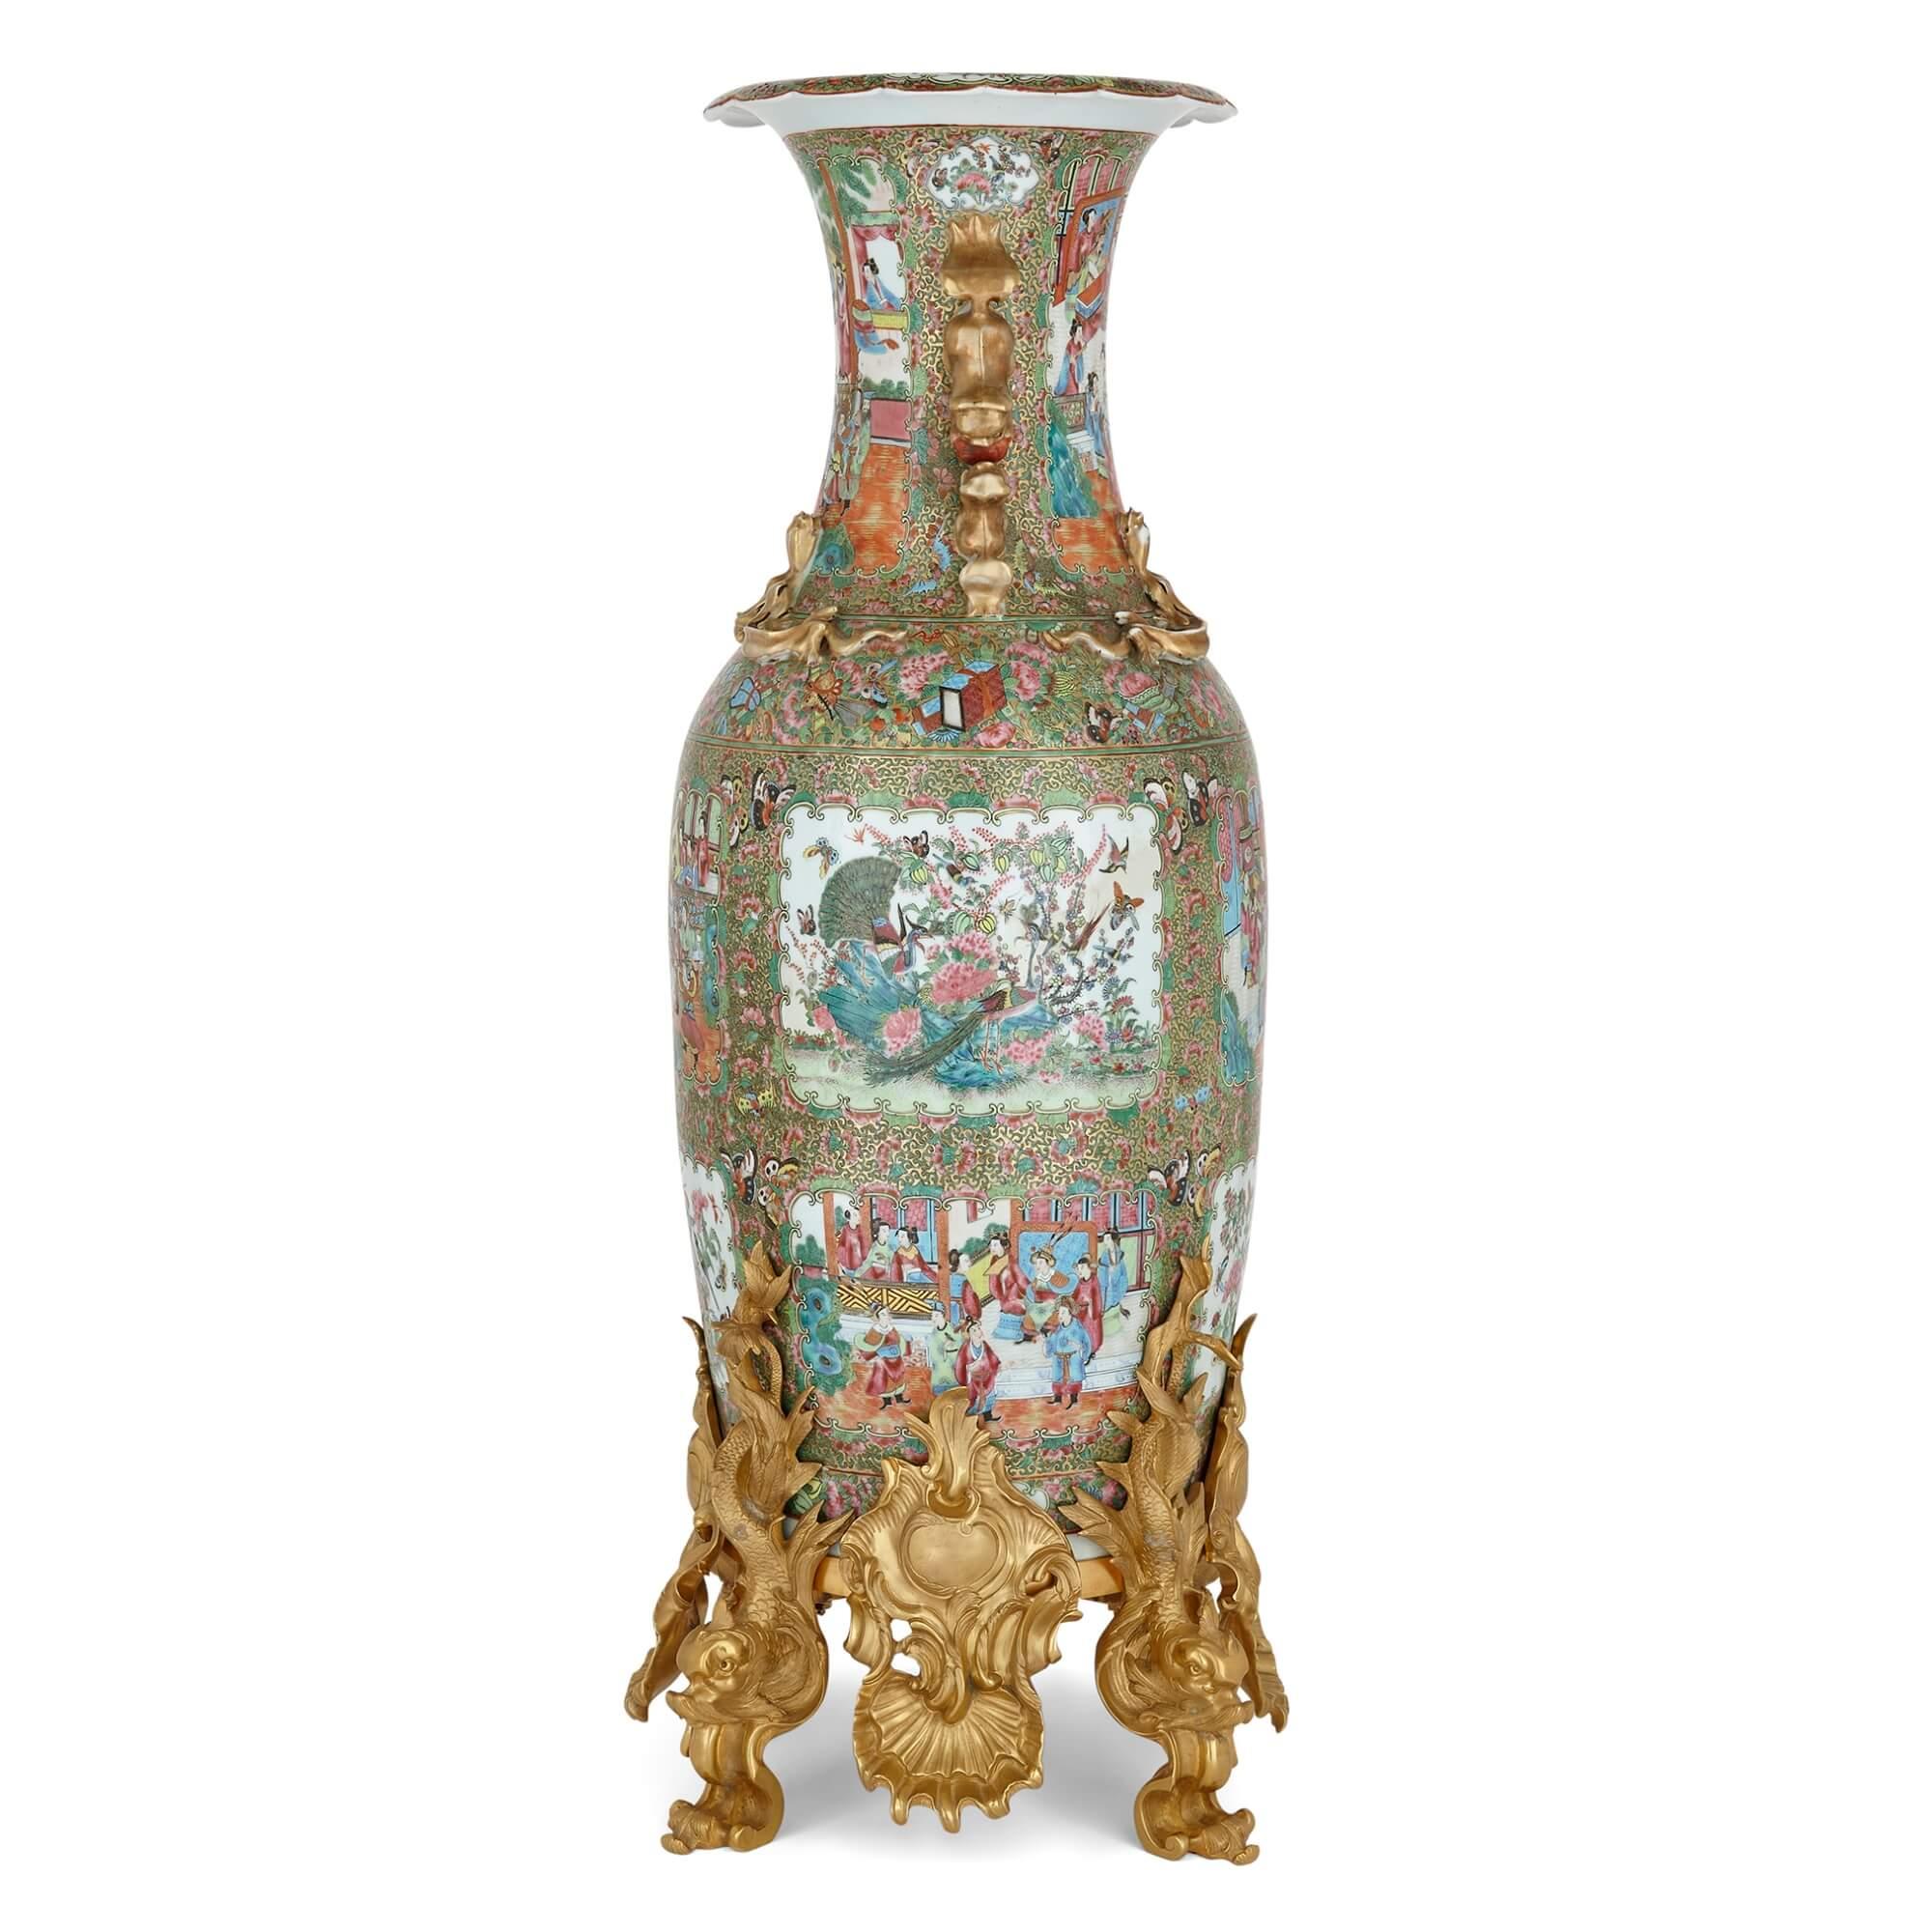 Large Chinese Canton famille verte ormolu mounted porcelain vase
Chinese, 19th Century
Height 107cm, diameter 37cm

This magnificent Chinese vase from Canton is decorated in the so-called famille verte manner, wherein the primary colour tones